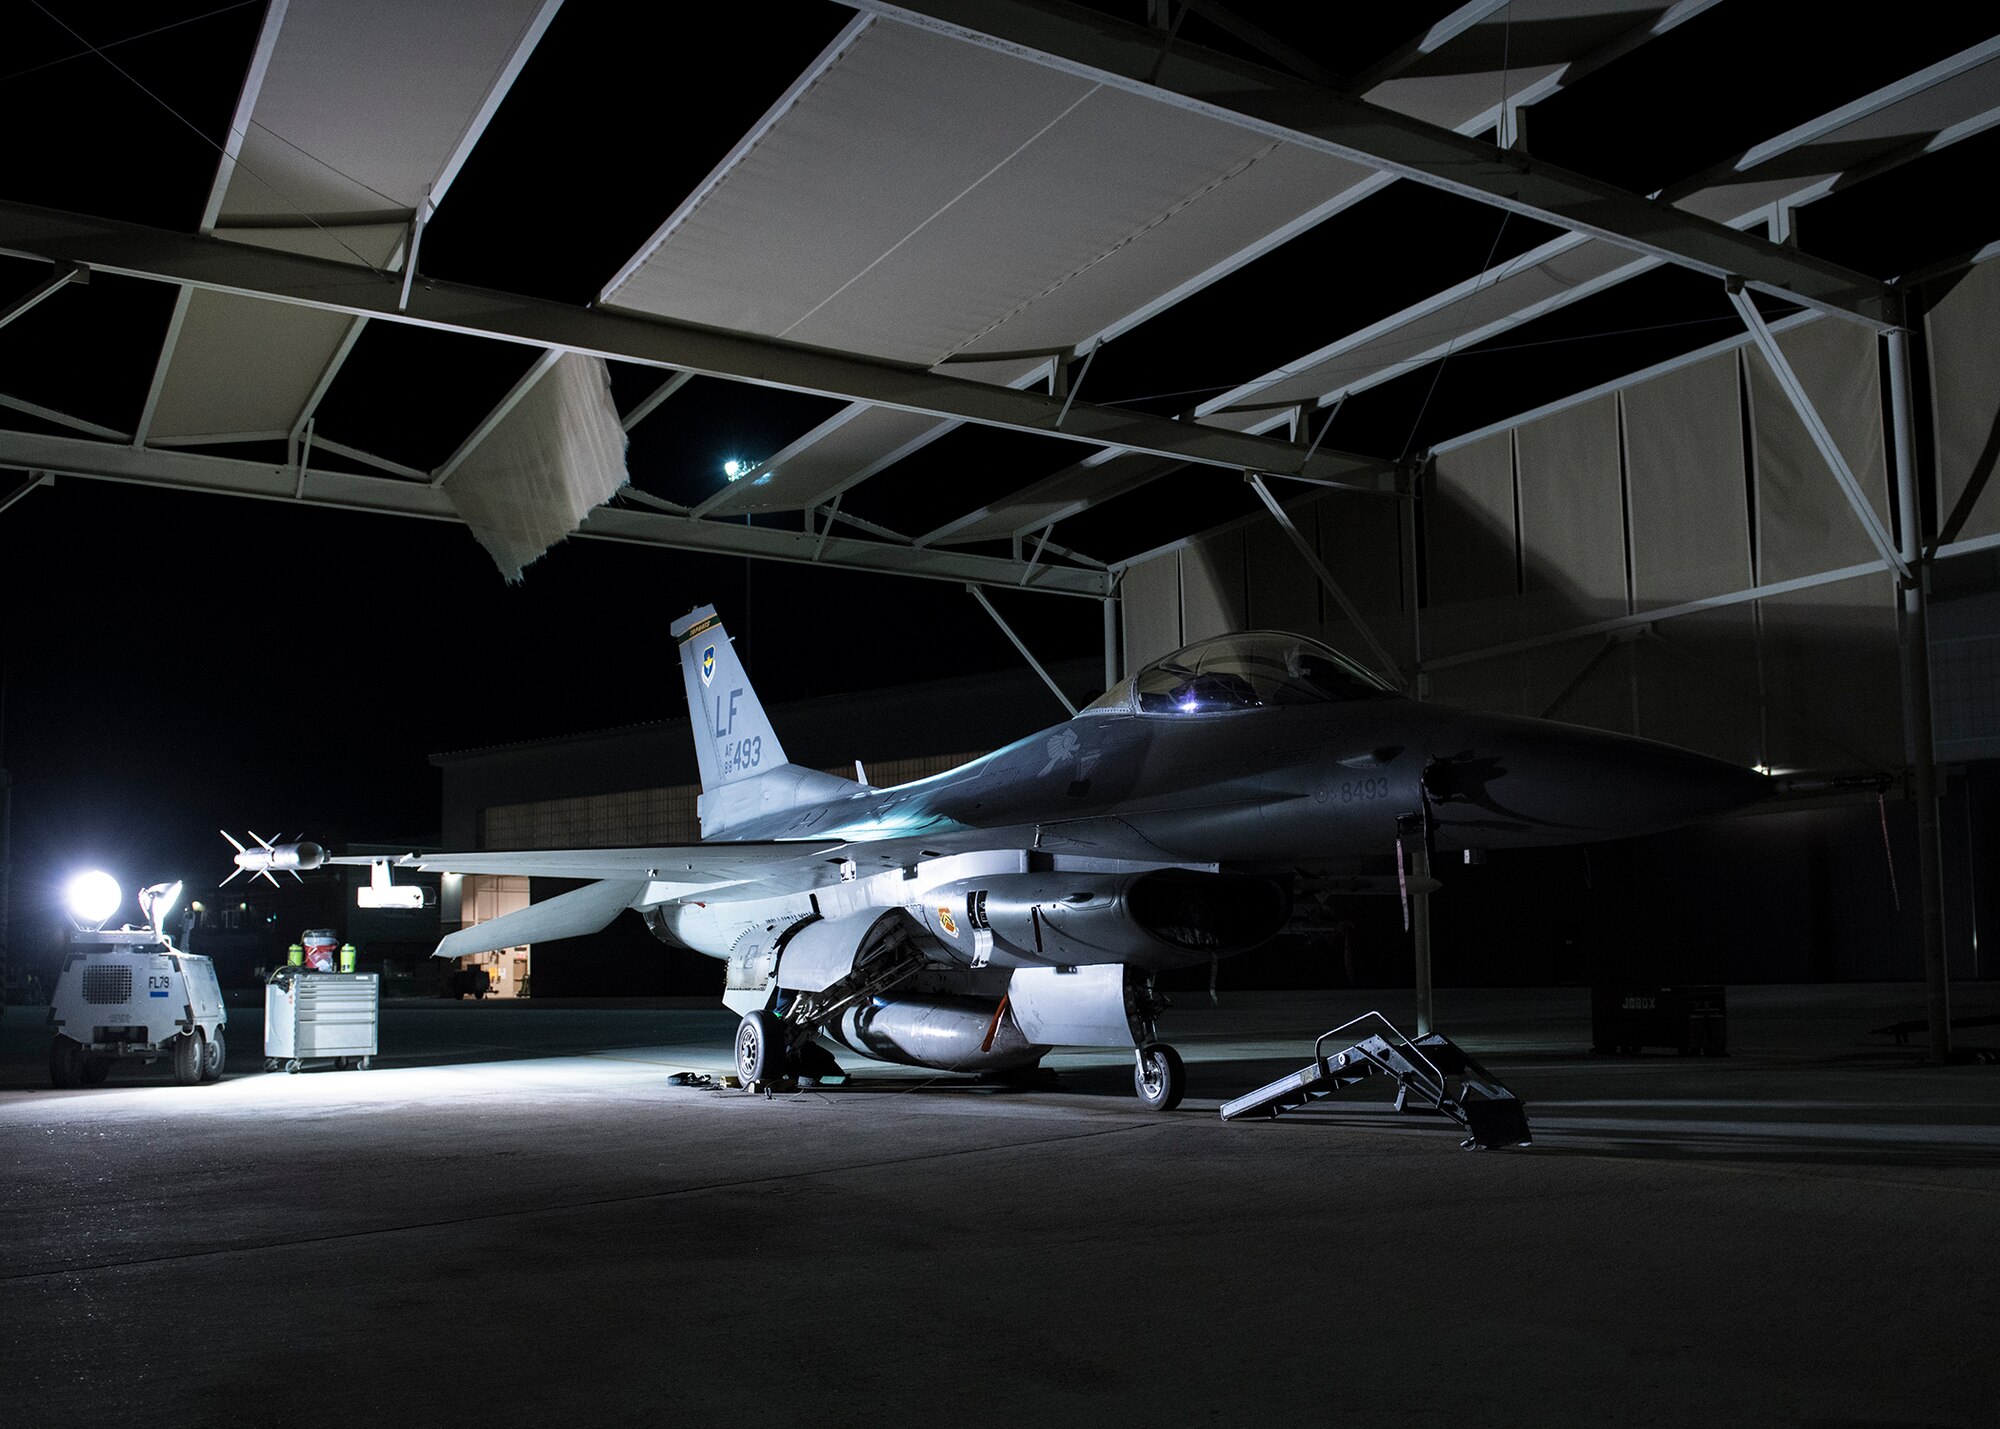 An F-16C Fighting Falcon assigned to the 310th Fighter Squadron is ready for maintenance June 24, 2020, at Luke Air Force Base, Ariz.